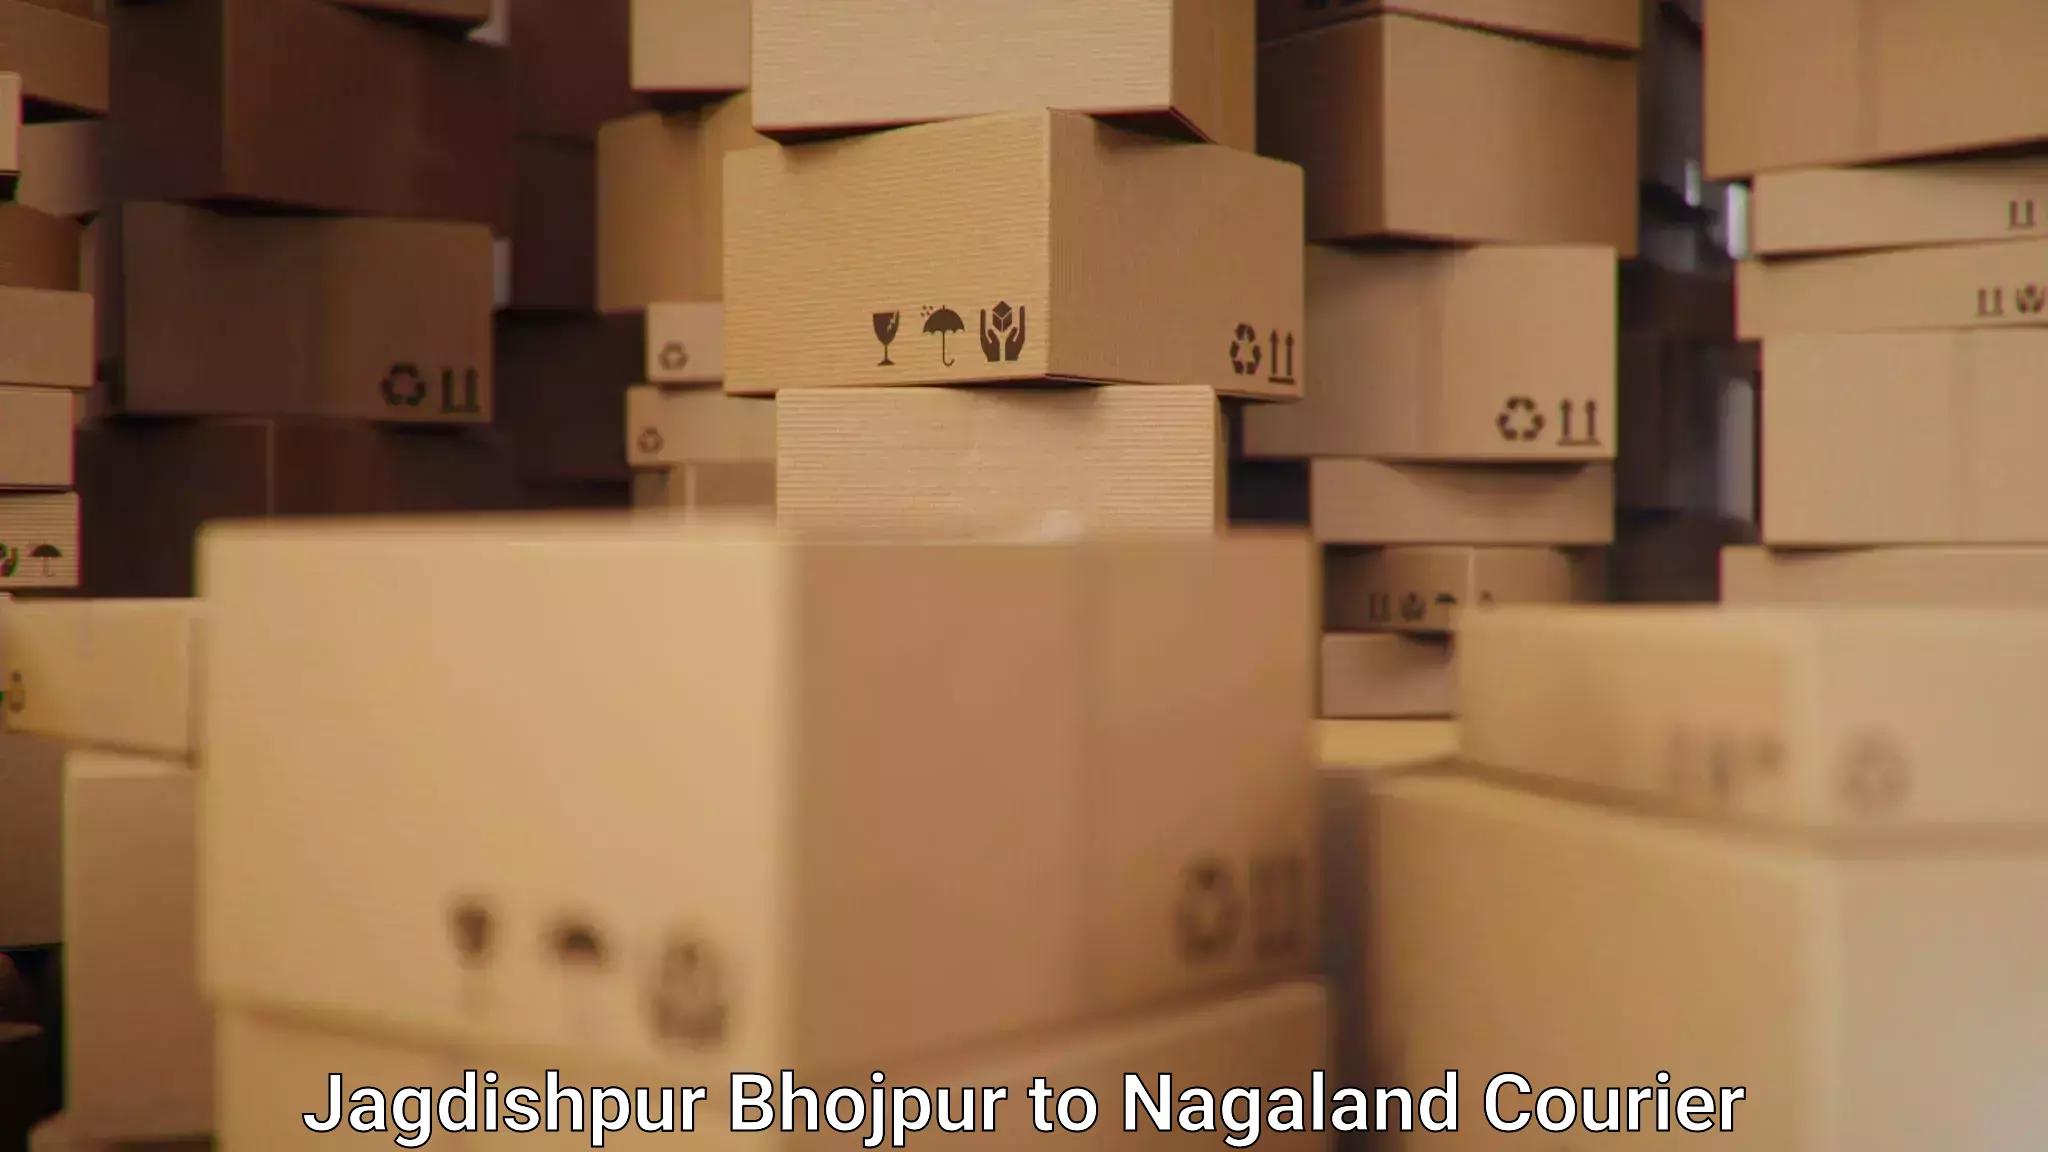 Reliable courier service Jagdishpur Bhojpur to Kohima